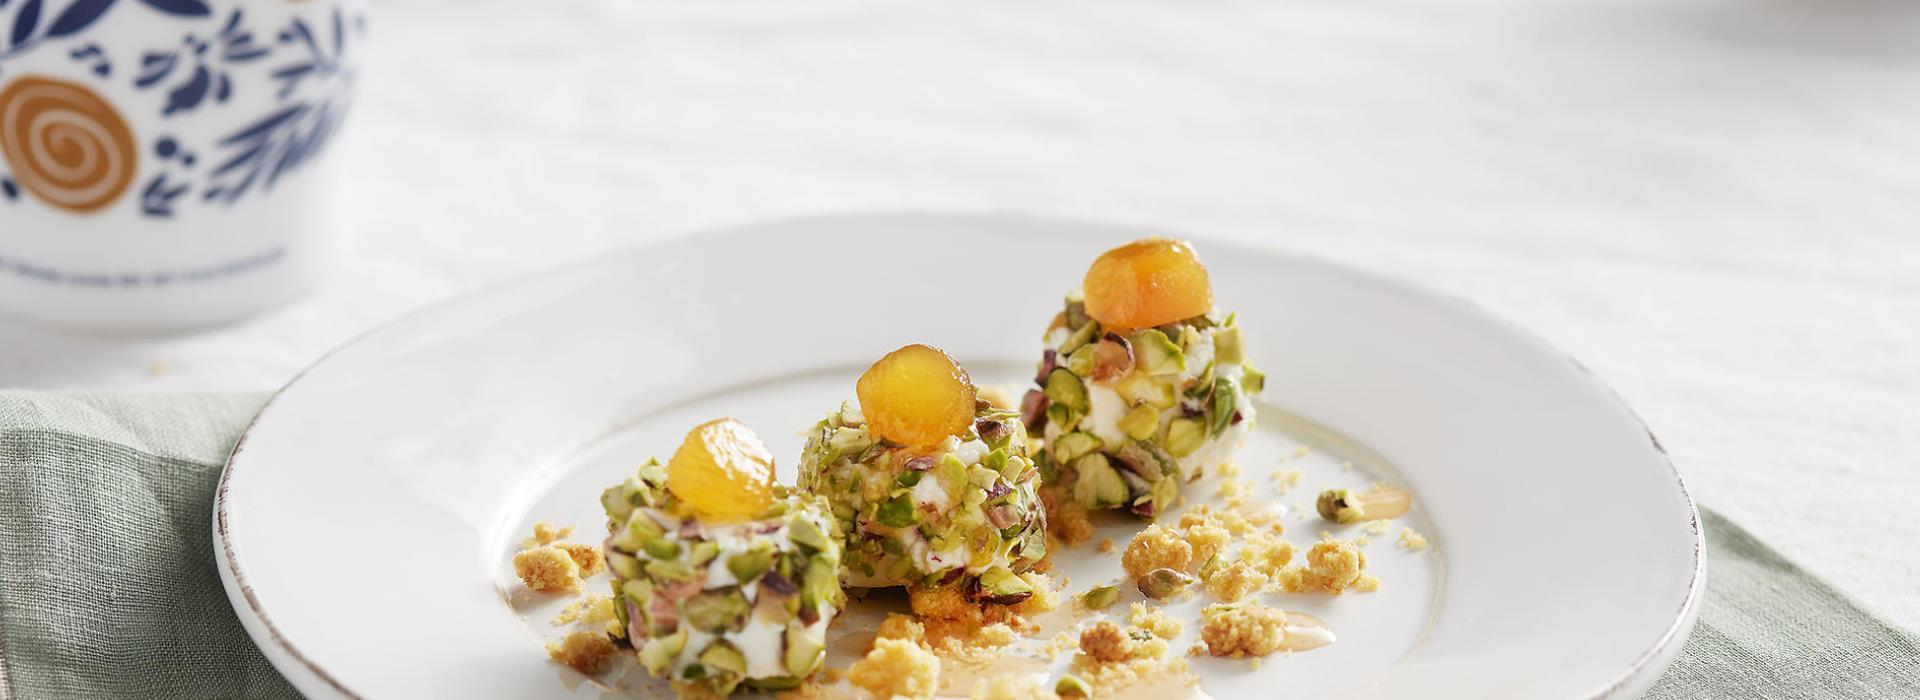 To create a unique meal a lot of ingredients are unnecessary. Try the caprino with Zenzero Fabbri and pistachios